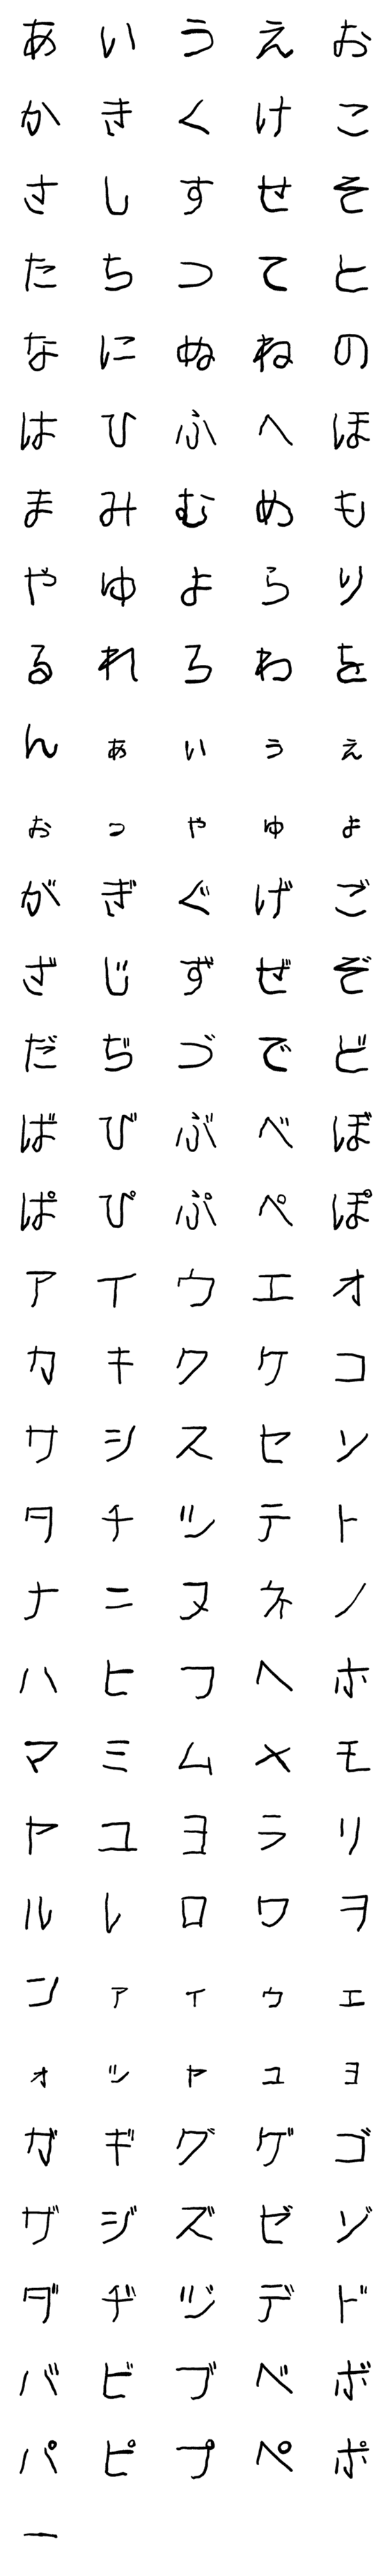 [LINE絵文字]ガタガタ左手文字の画像一覧